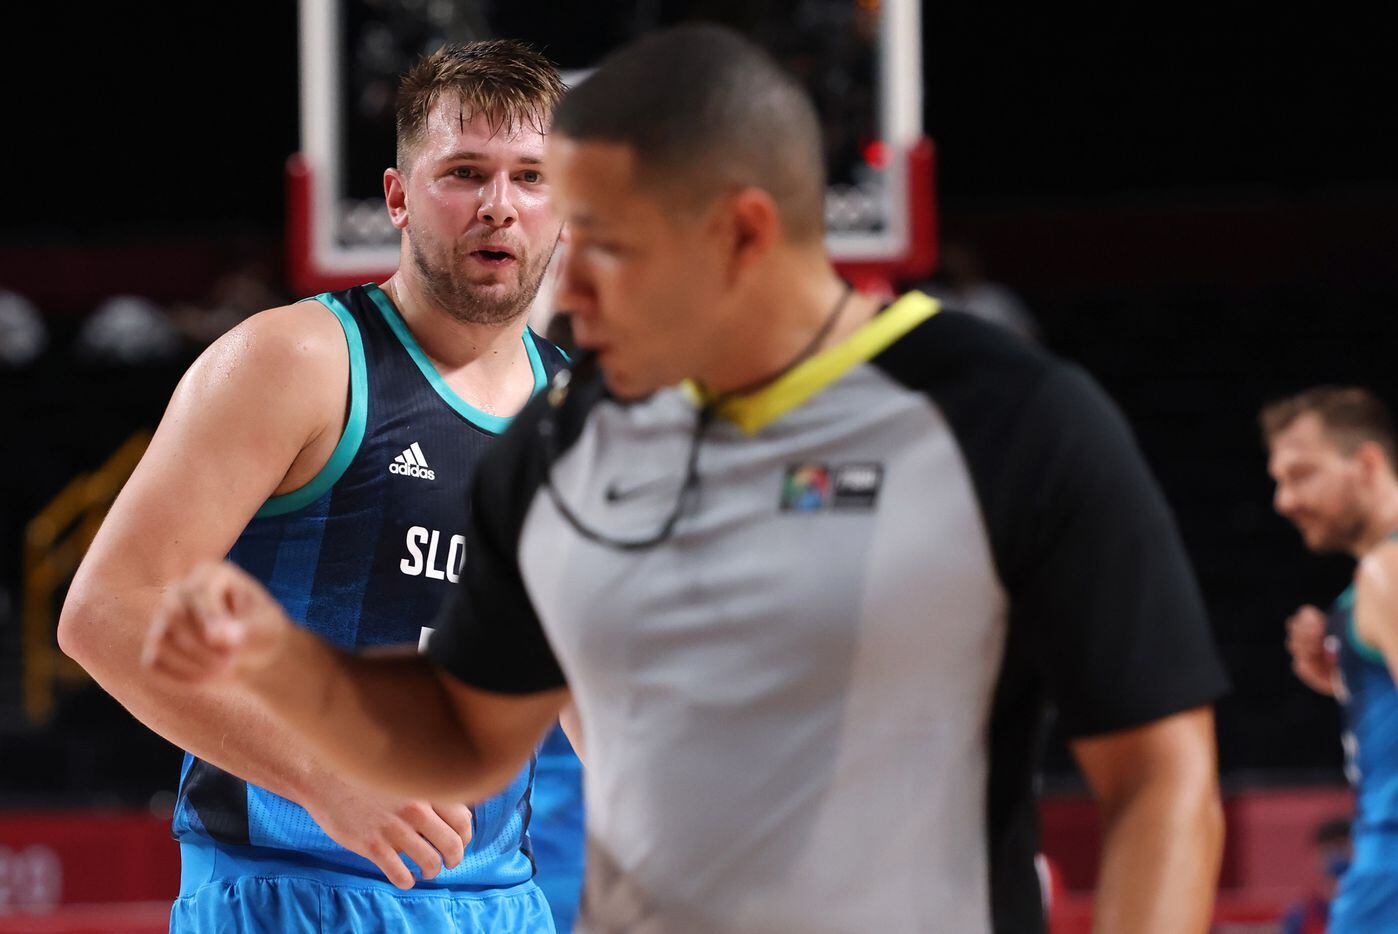 Slovenia’s Luka Doncic (77) reacts to a referee’s call signaling the ball was out on Slovenia after a play in the second half of play against Argentina during the postponed 2020 Tokyo Olympics at Saitama Super Arena on Monday, July 26, 2021, in Saitama, Japan. Slovenia defeated Argentina 118-100. (Vernon Bryant/The Dallas Morning News)